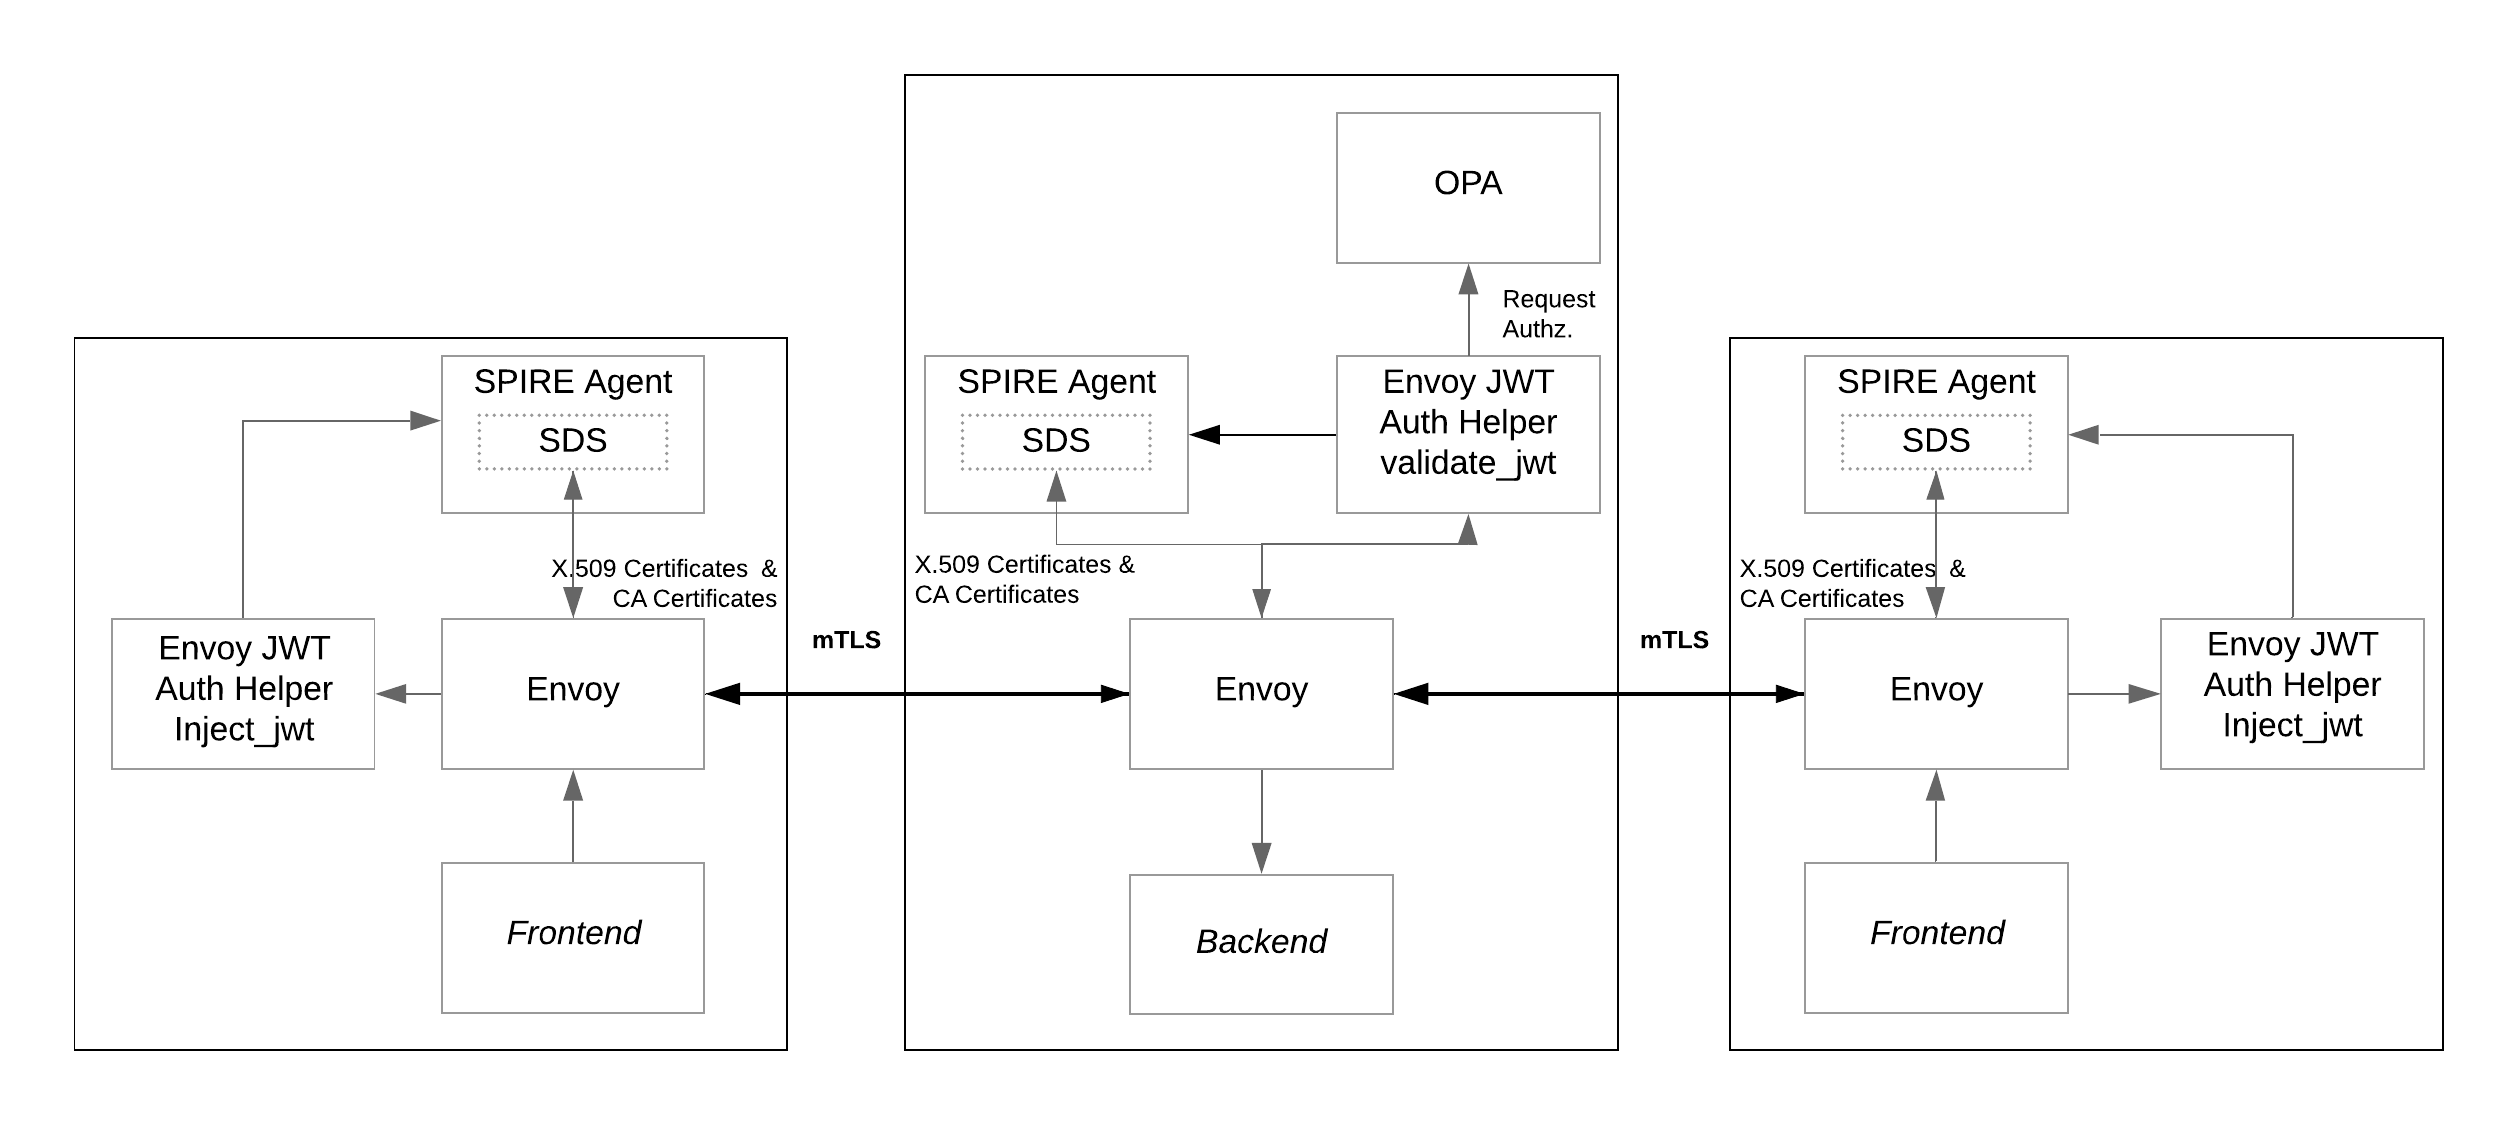 SPIRE Envoy-JWT with OPA integration diagram